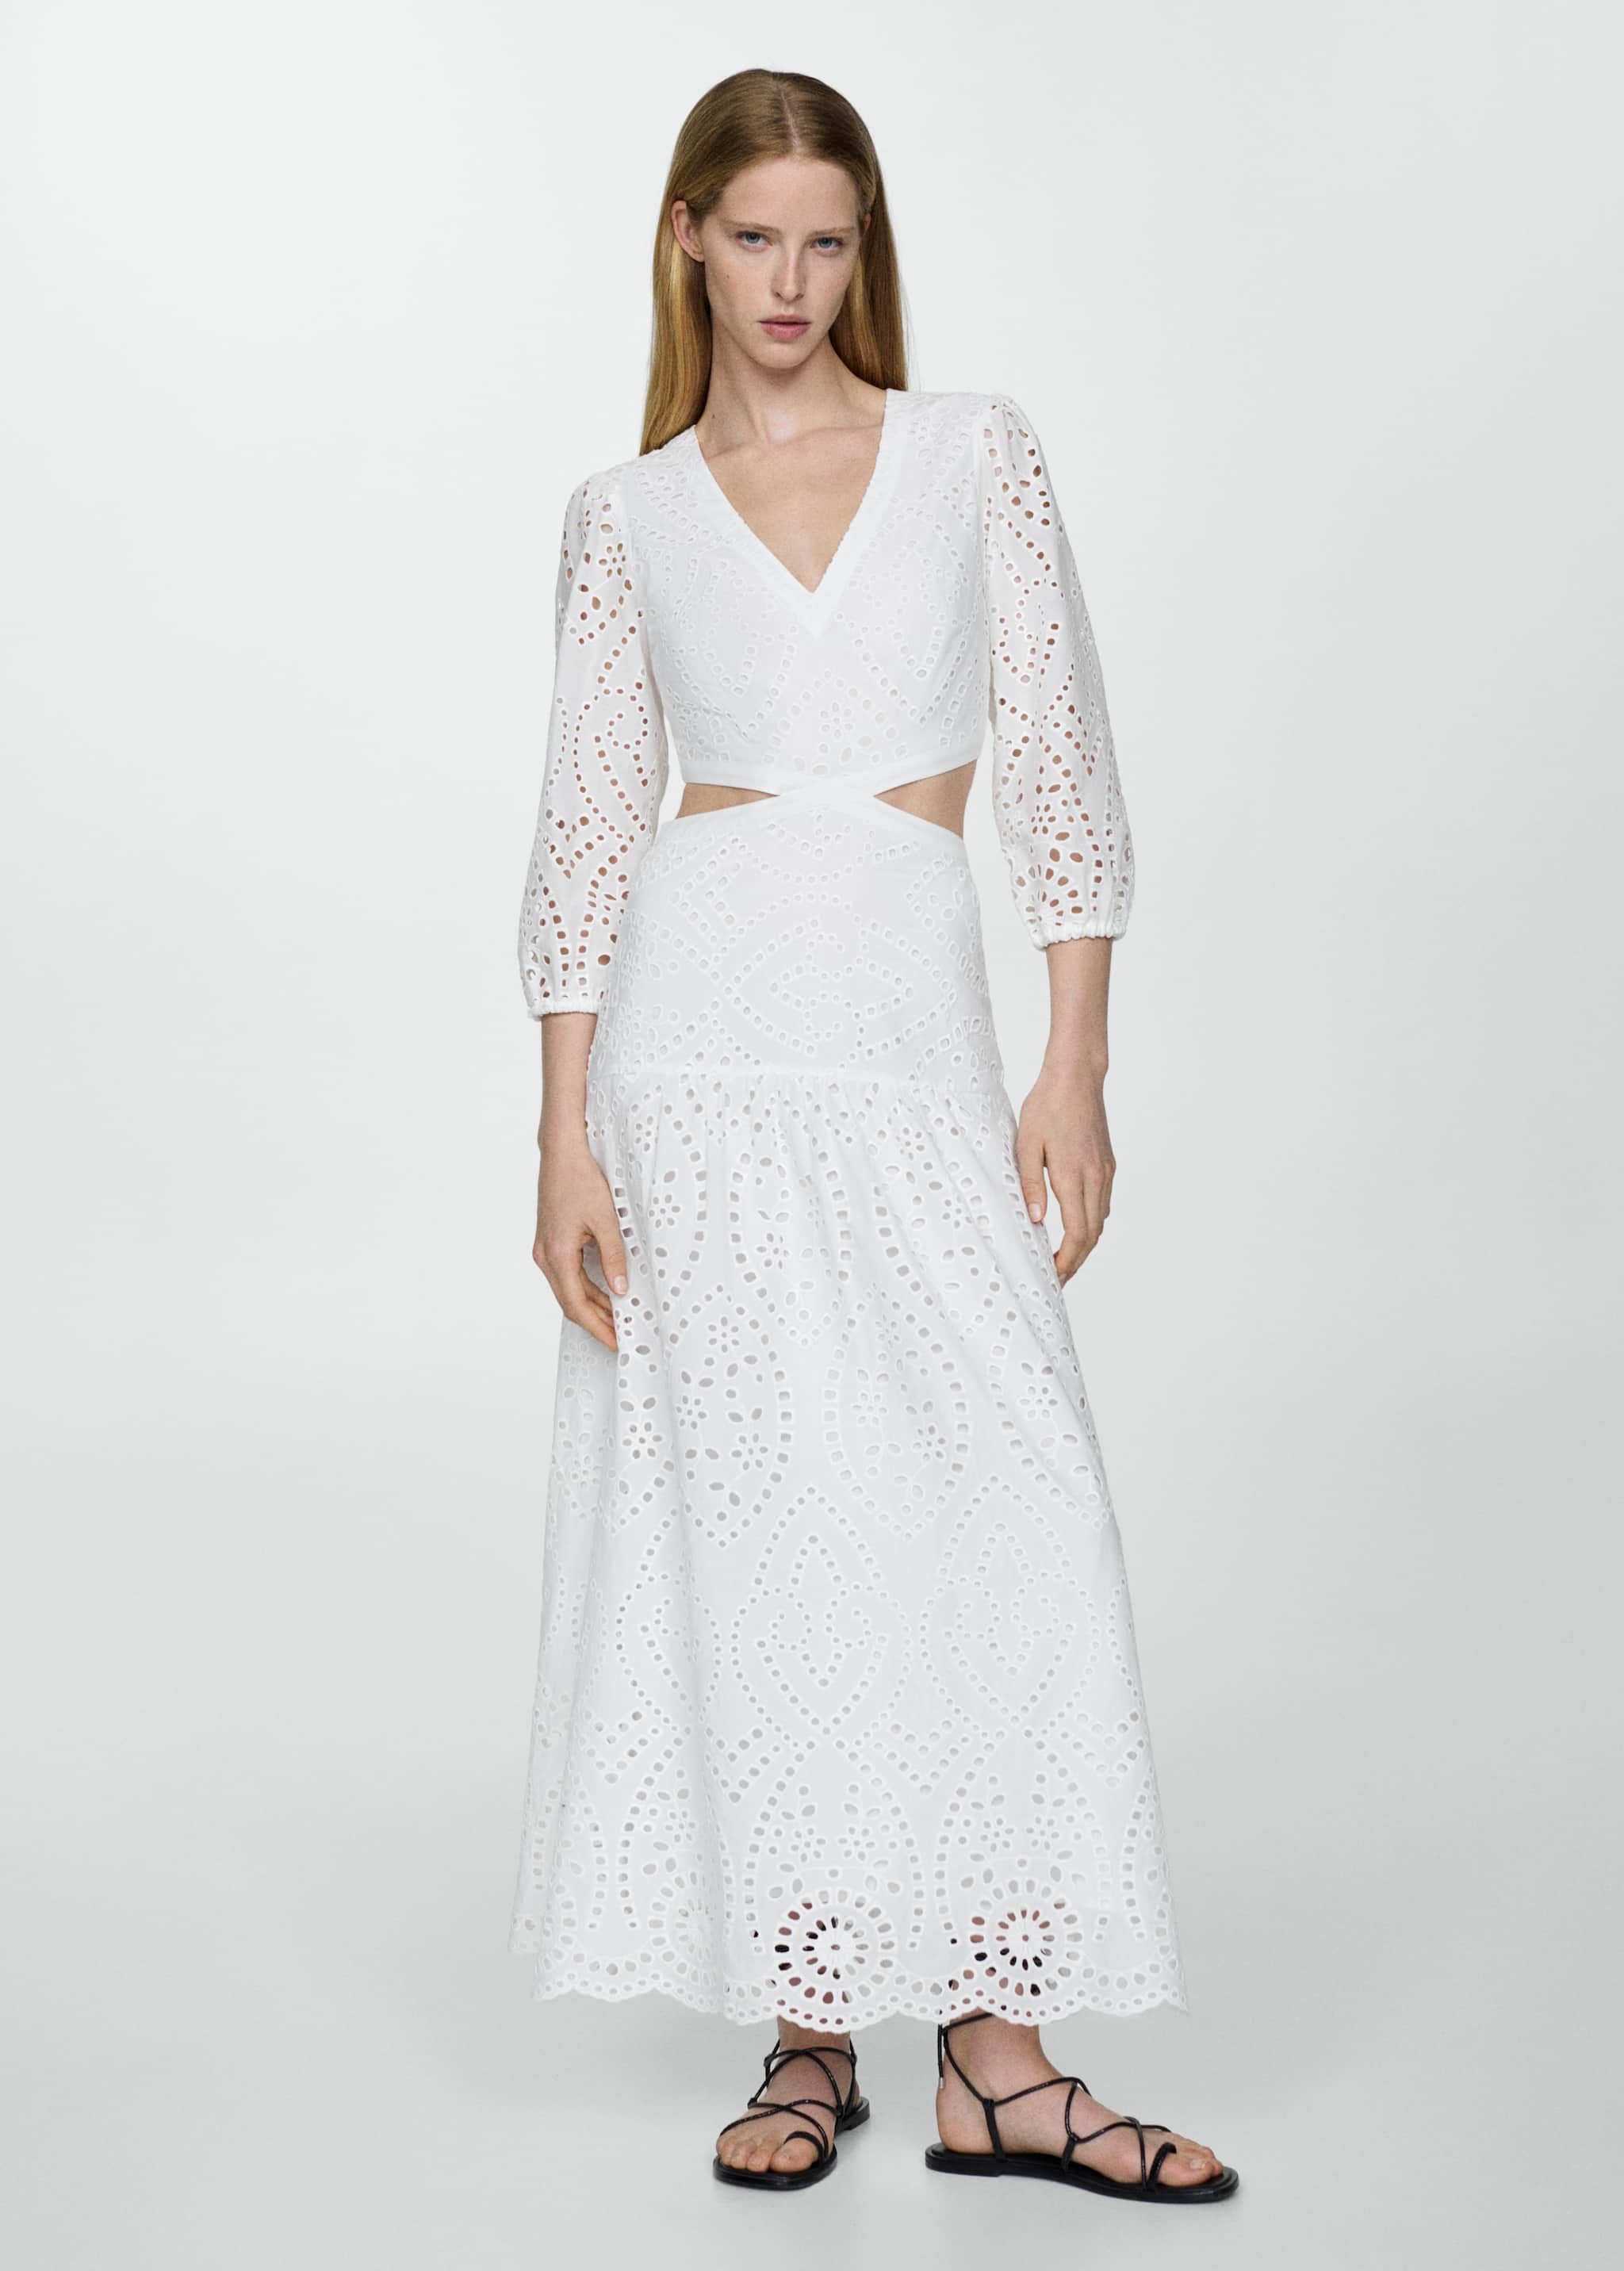 Embroidered dress with slits - General plane